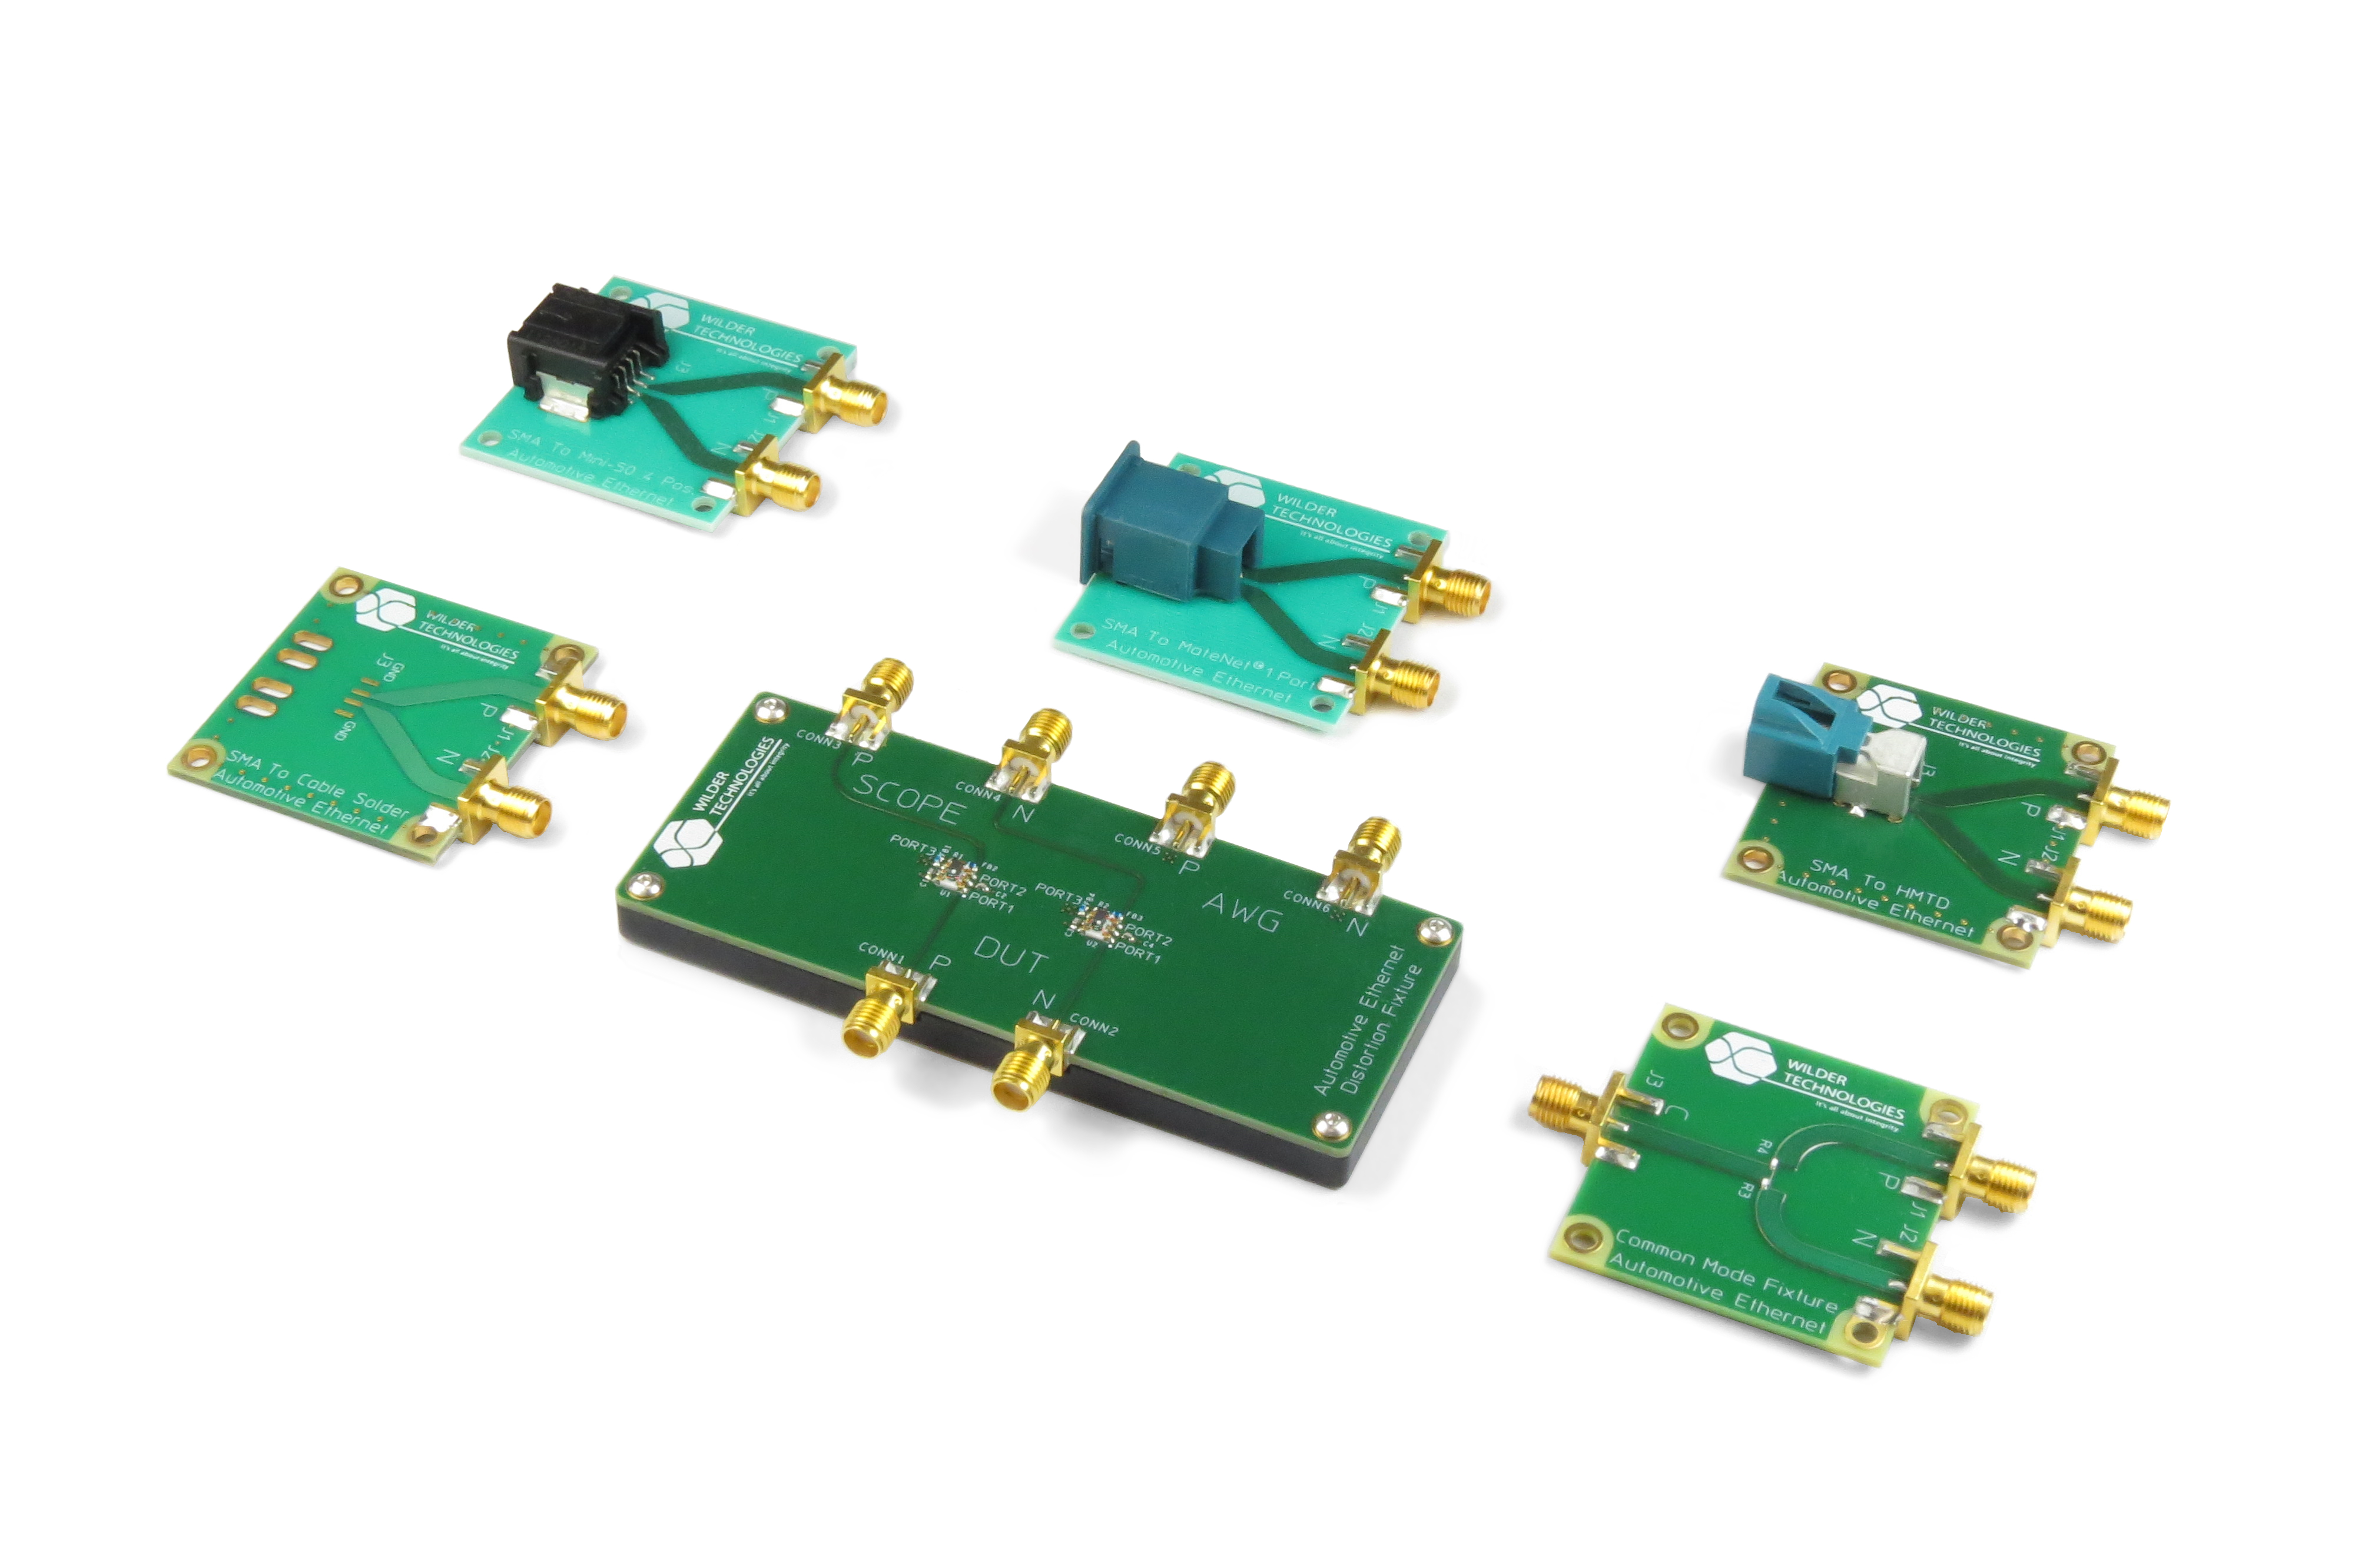 Automotive Product fixtures supports the 100/1000/MultiGBASE-T1 Compliancy standards with many different connectors such as MateNet (TE), H-MTD (Rosenberger), Mini50 (Molex). 